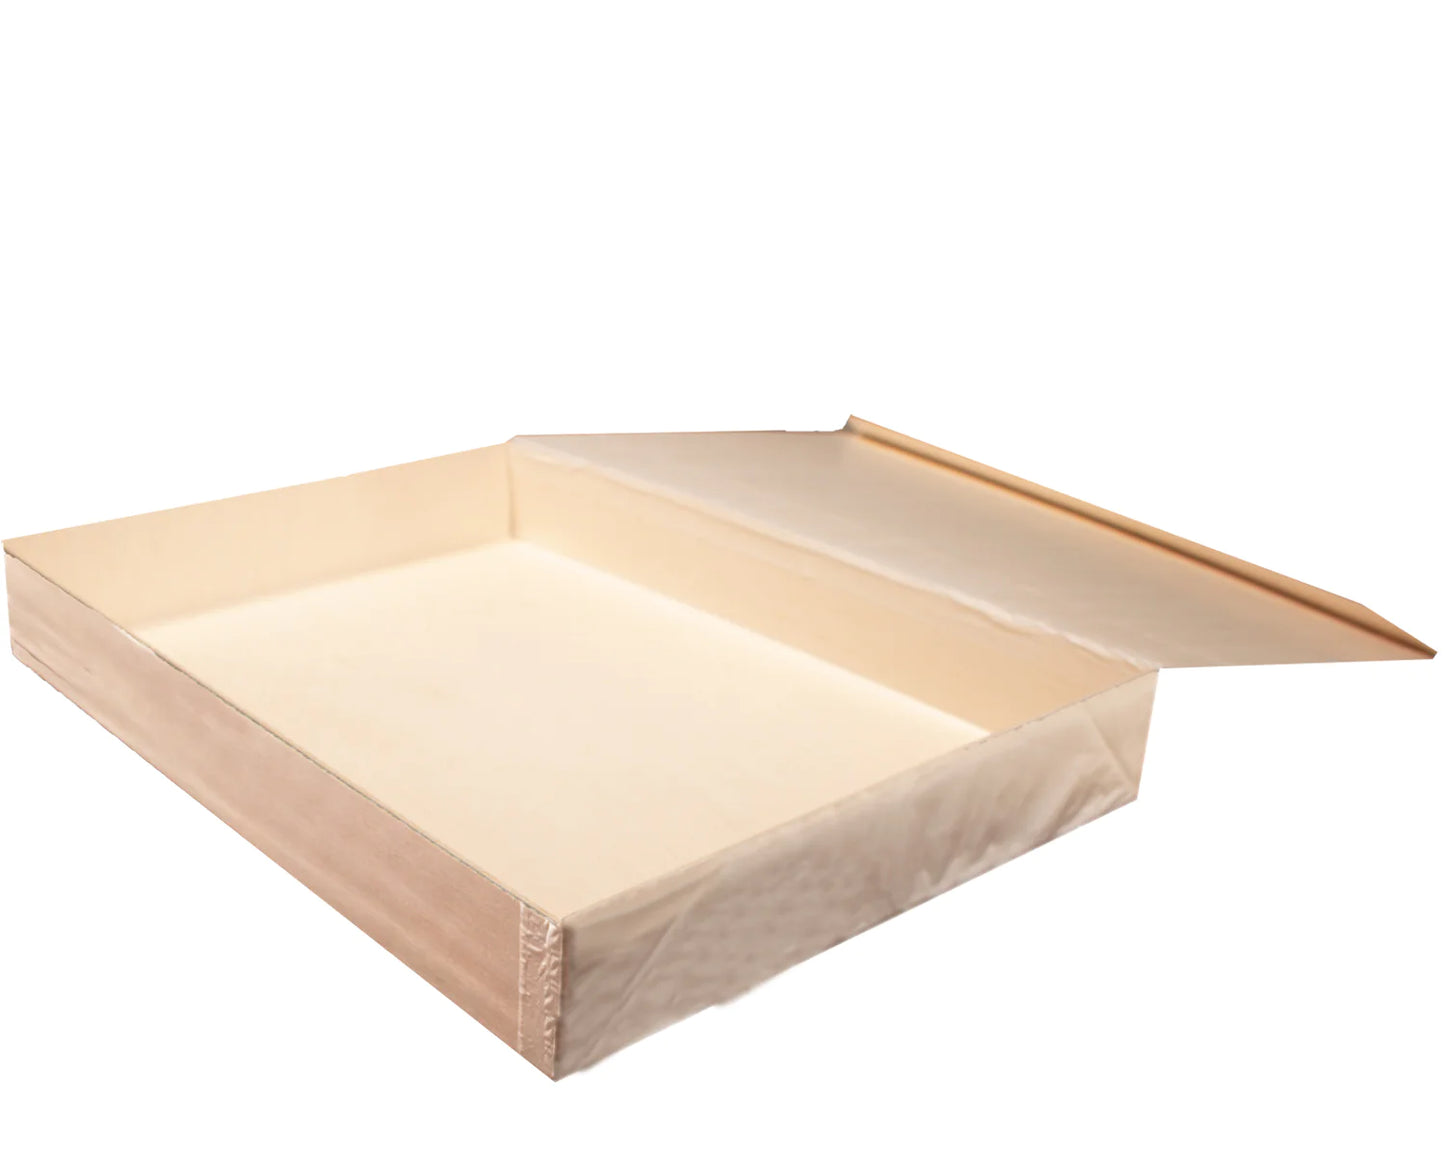 11" x 15" x 3" Collapsible Food Box w/ Attached Lid | Deep Box | Extra Large